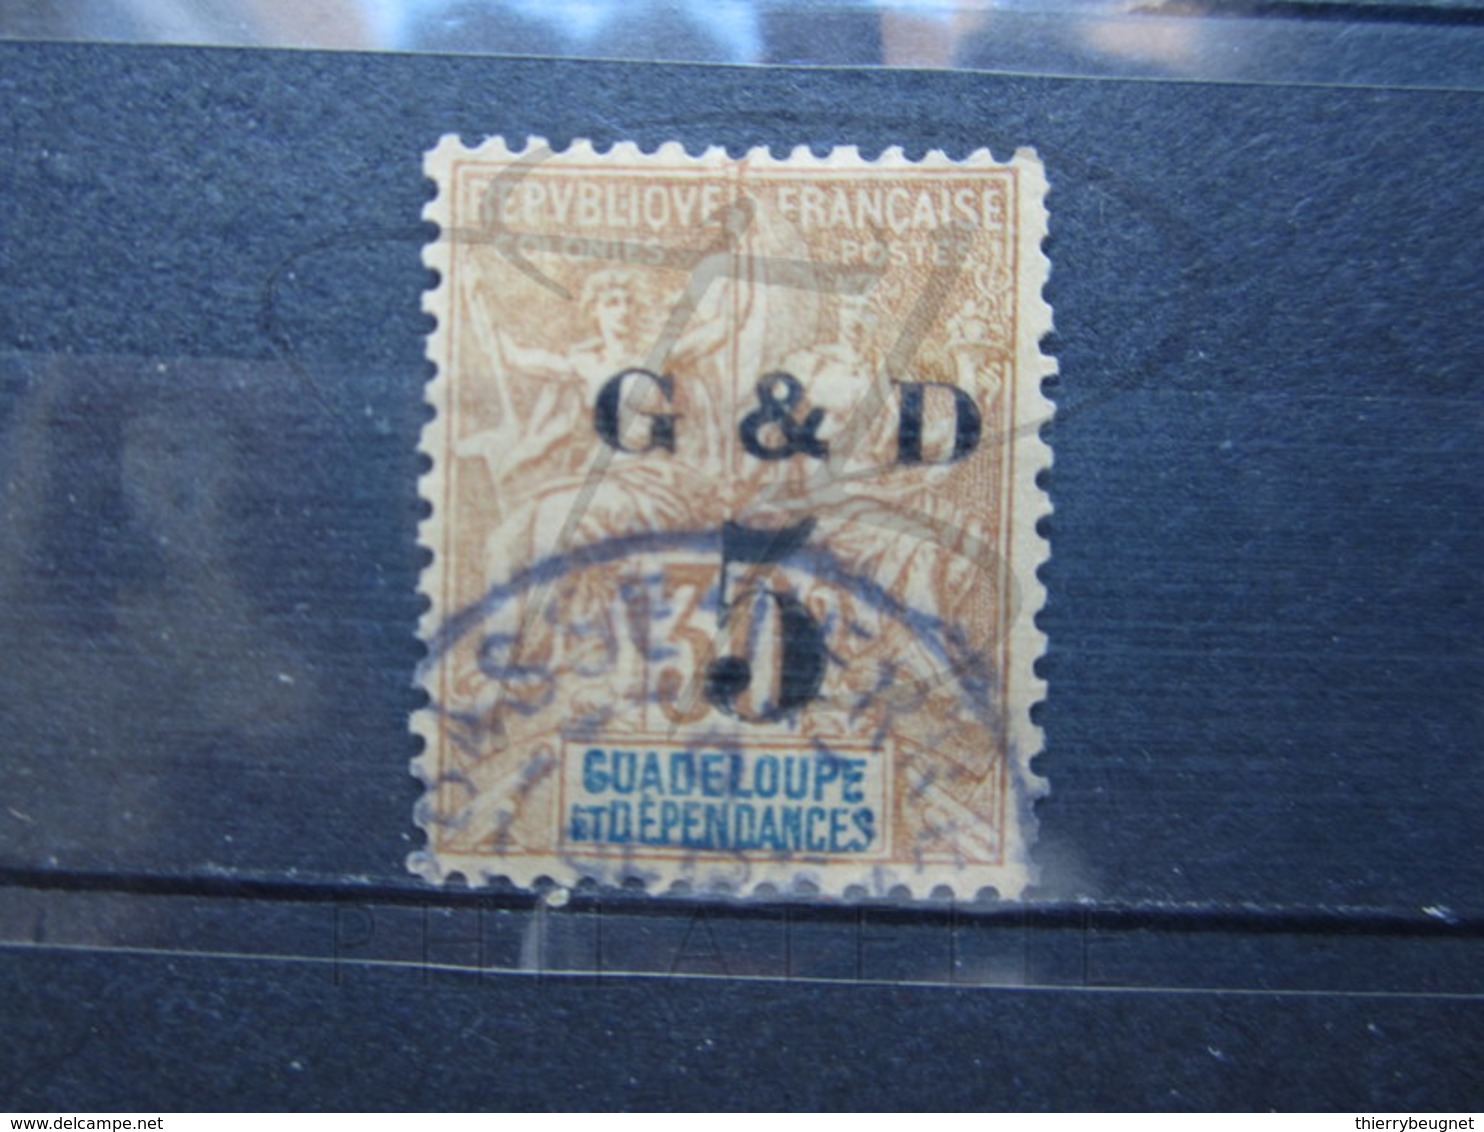 VEND BEAU TIMBRE DE GUADELOUPE N° 45a , CACHET " BASSE-TERRE " !!! - Used Stamps